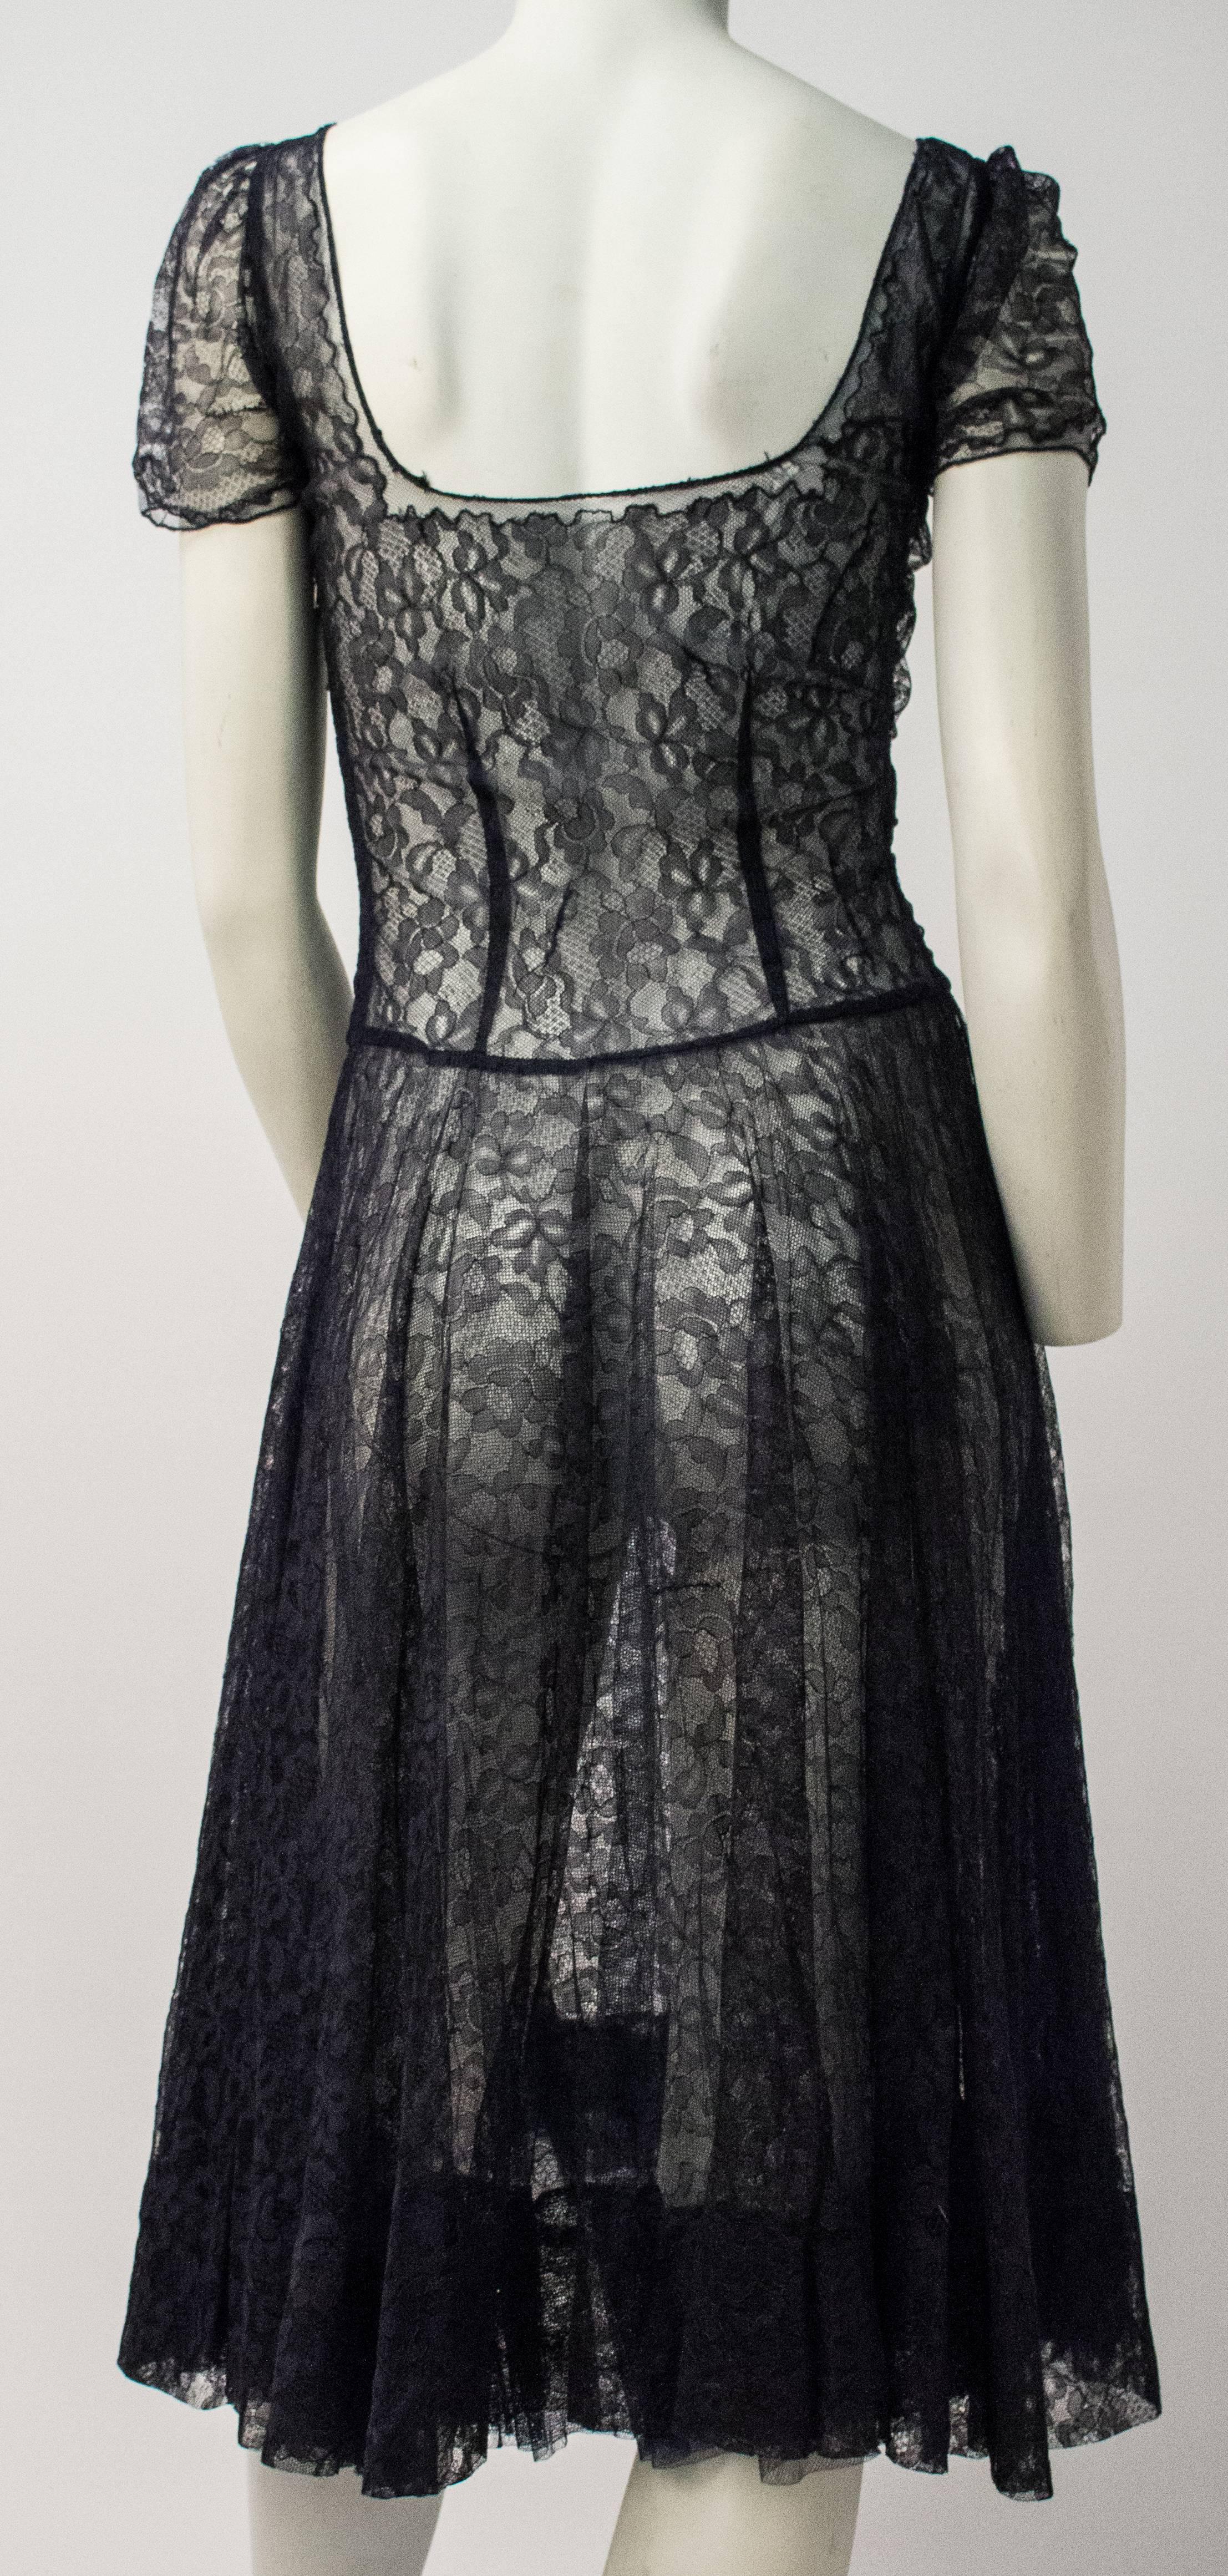 50s Navy Blue Lace Dress. Sheer lace overdress with ruched front bodice. Original belt included. Size Small (please see measurements below). 